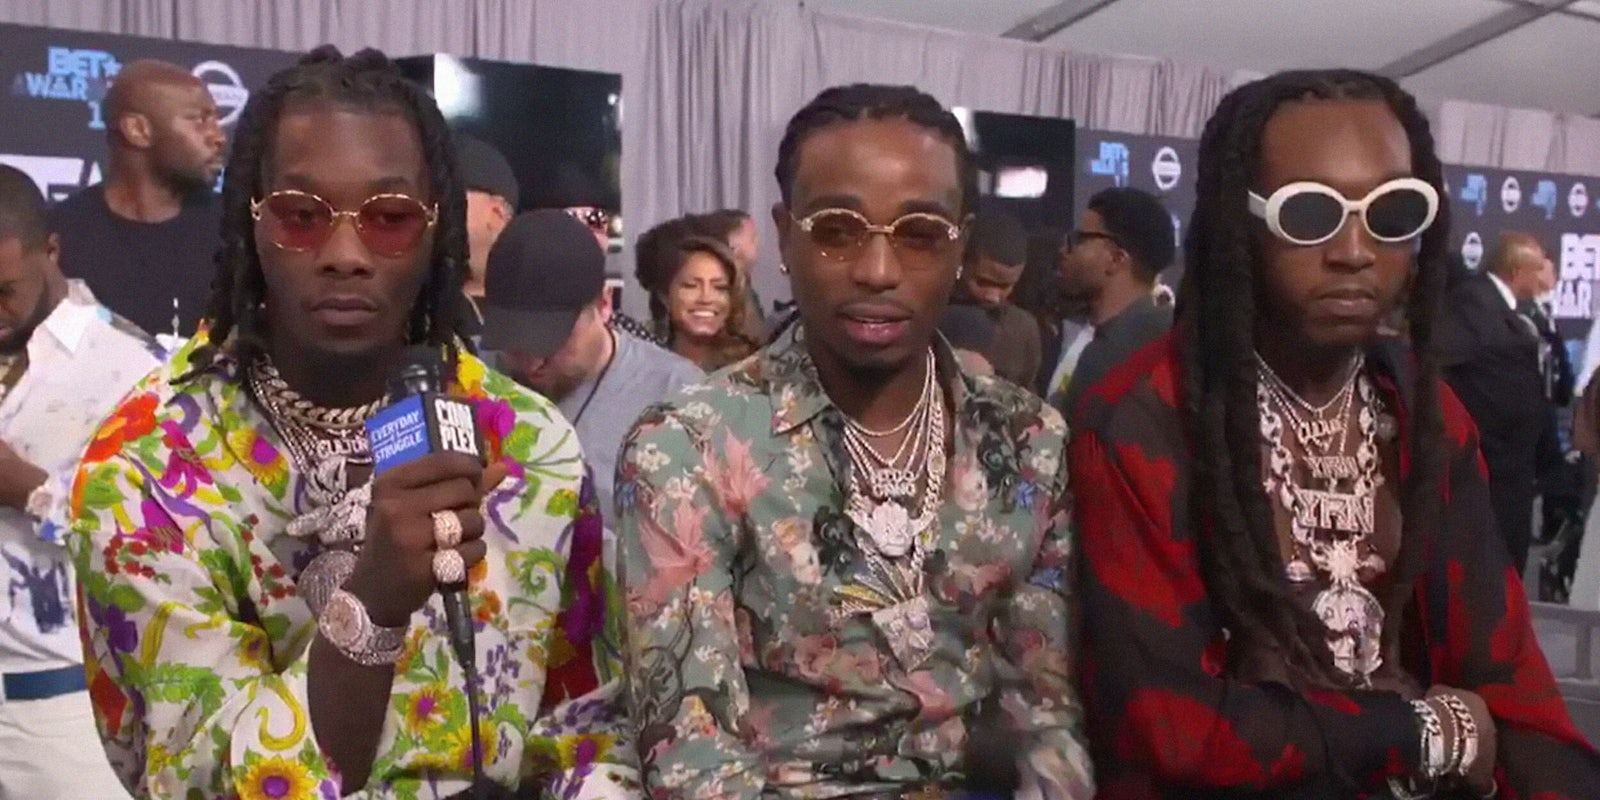 Everyday Struggle interview with Migos